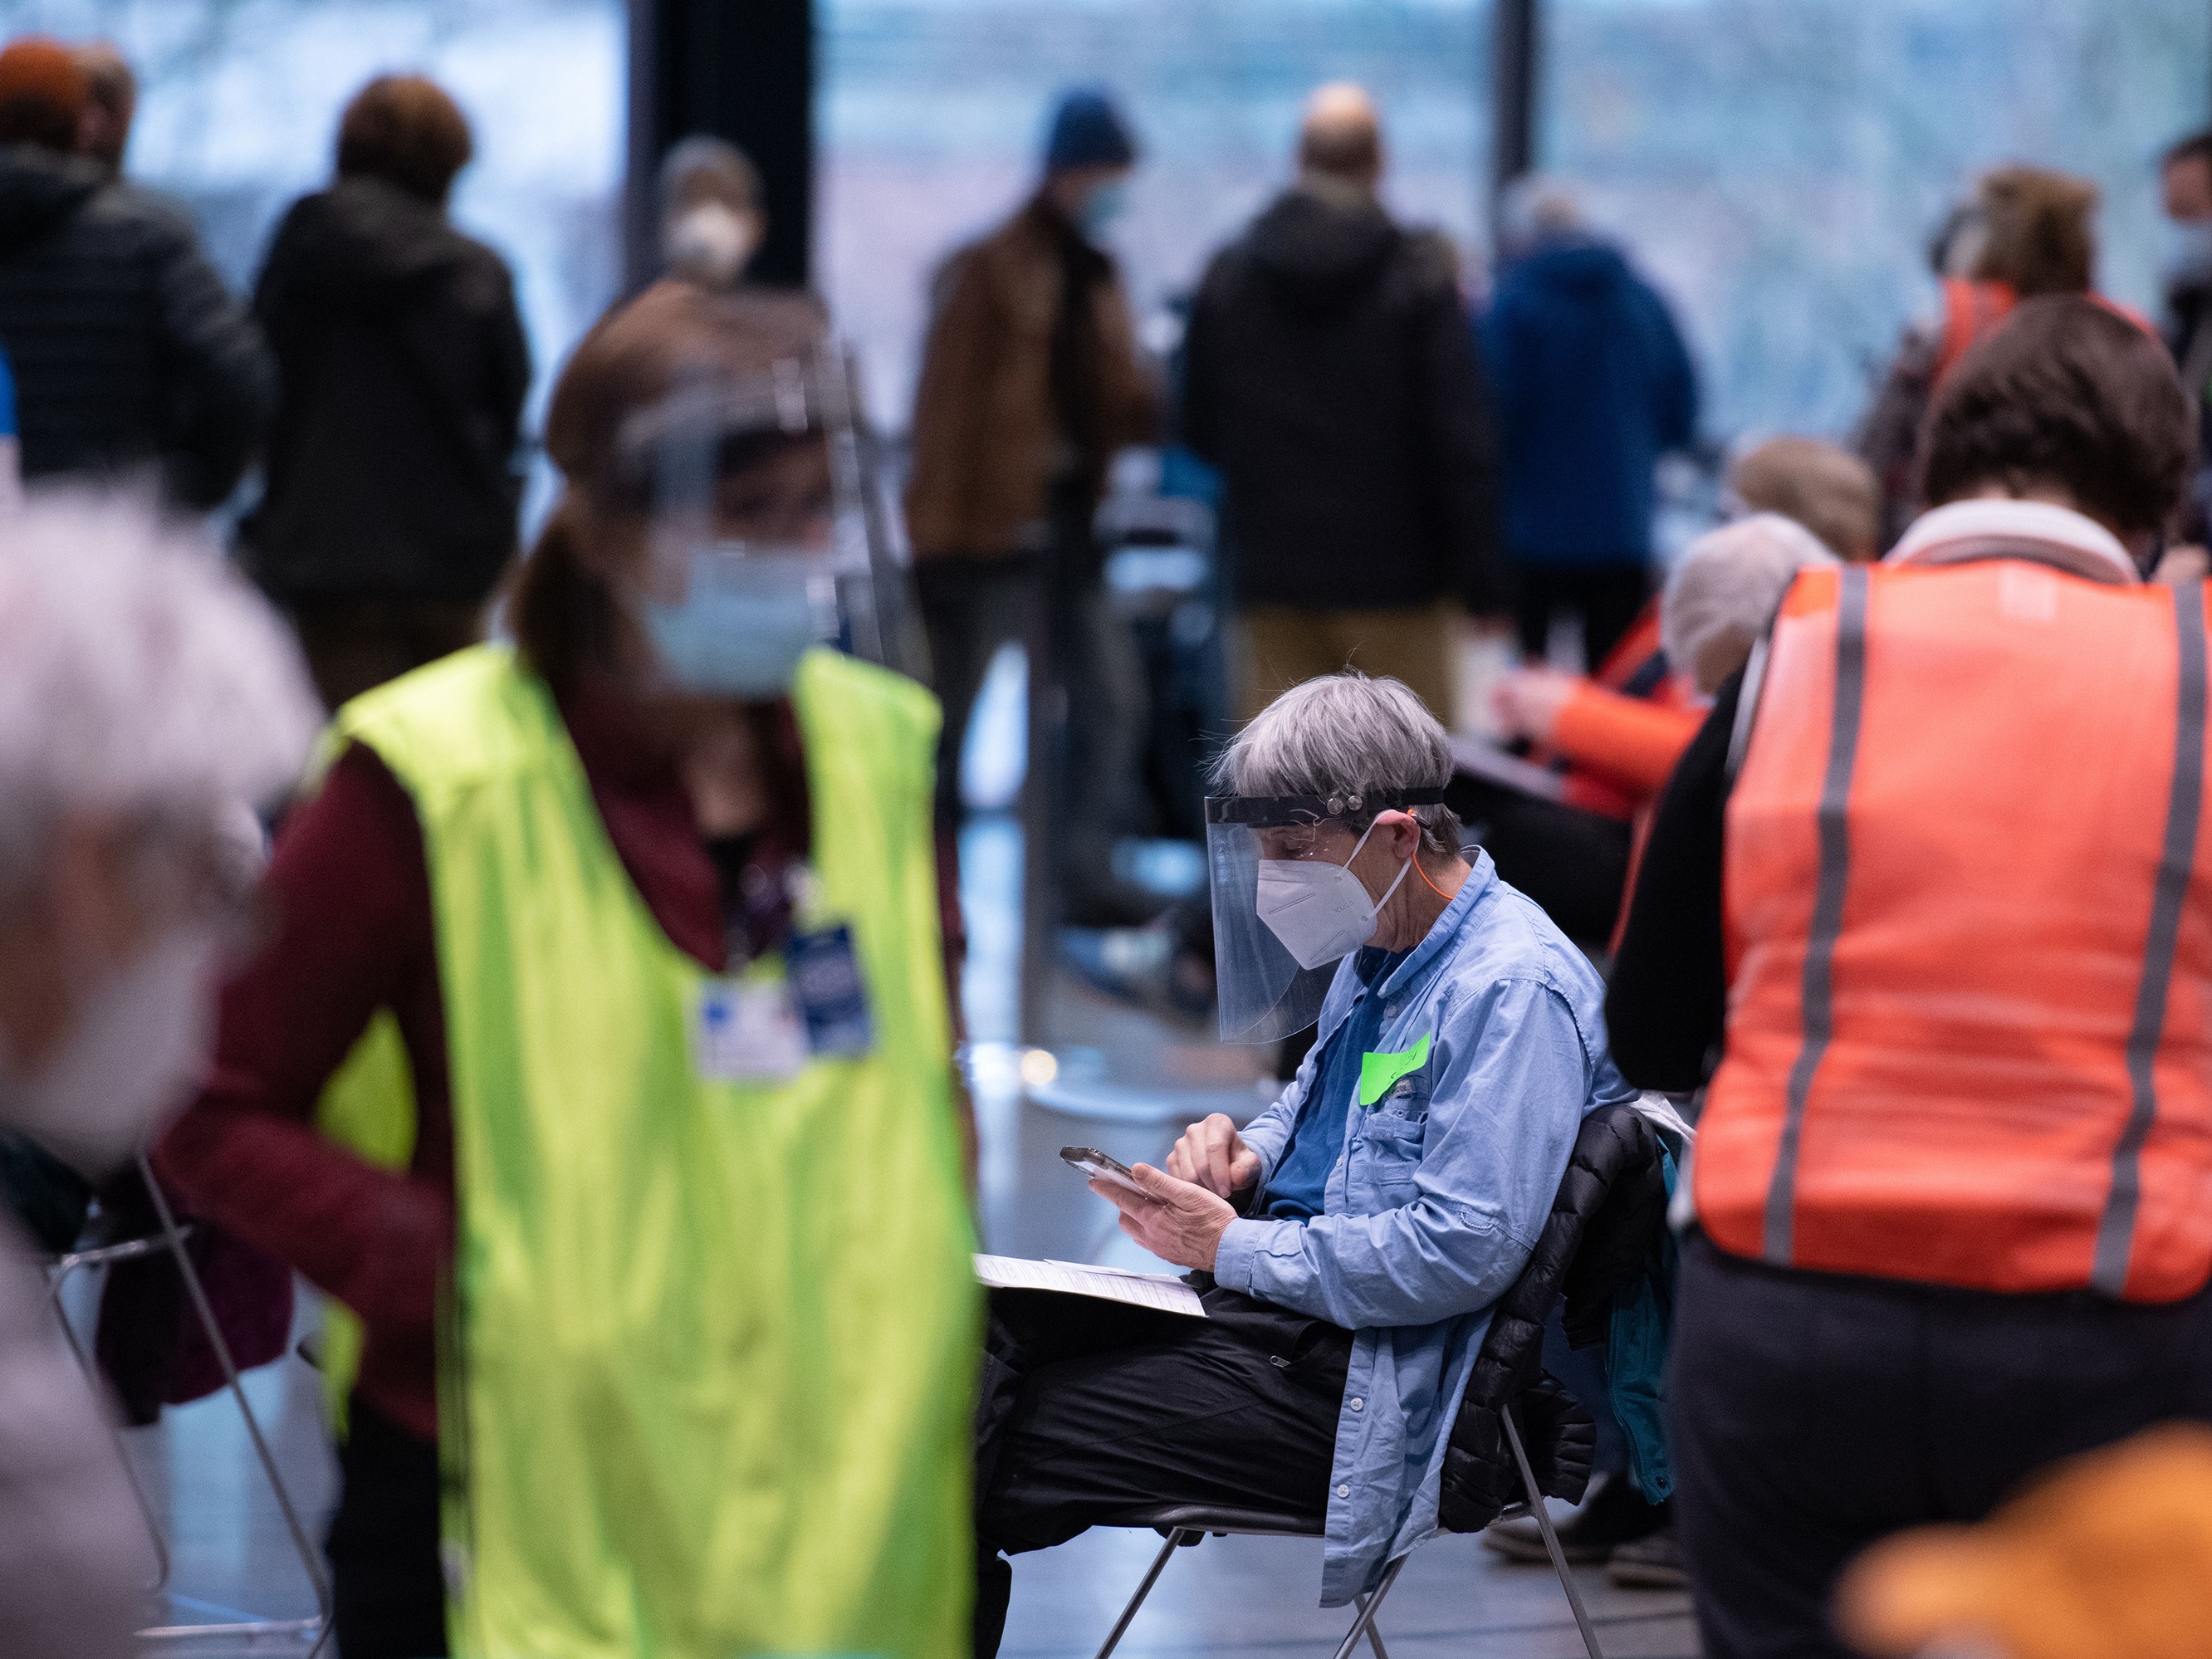 Workers and patients at a pop-up COVID-19 vaccination site near downtown Seattle in January. "The vast majority who are coming in do appear to be meeting the eligibility criteria," says Dr. Jeff Duchin, King County's public health officer. Grant Hindsley/AFP via Getty Images